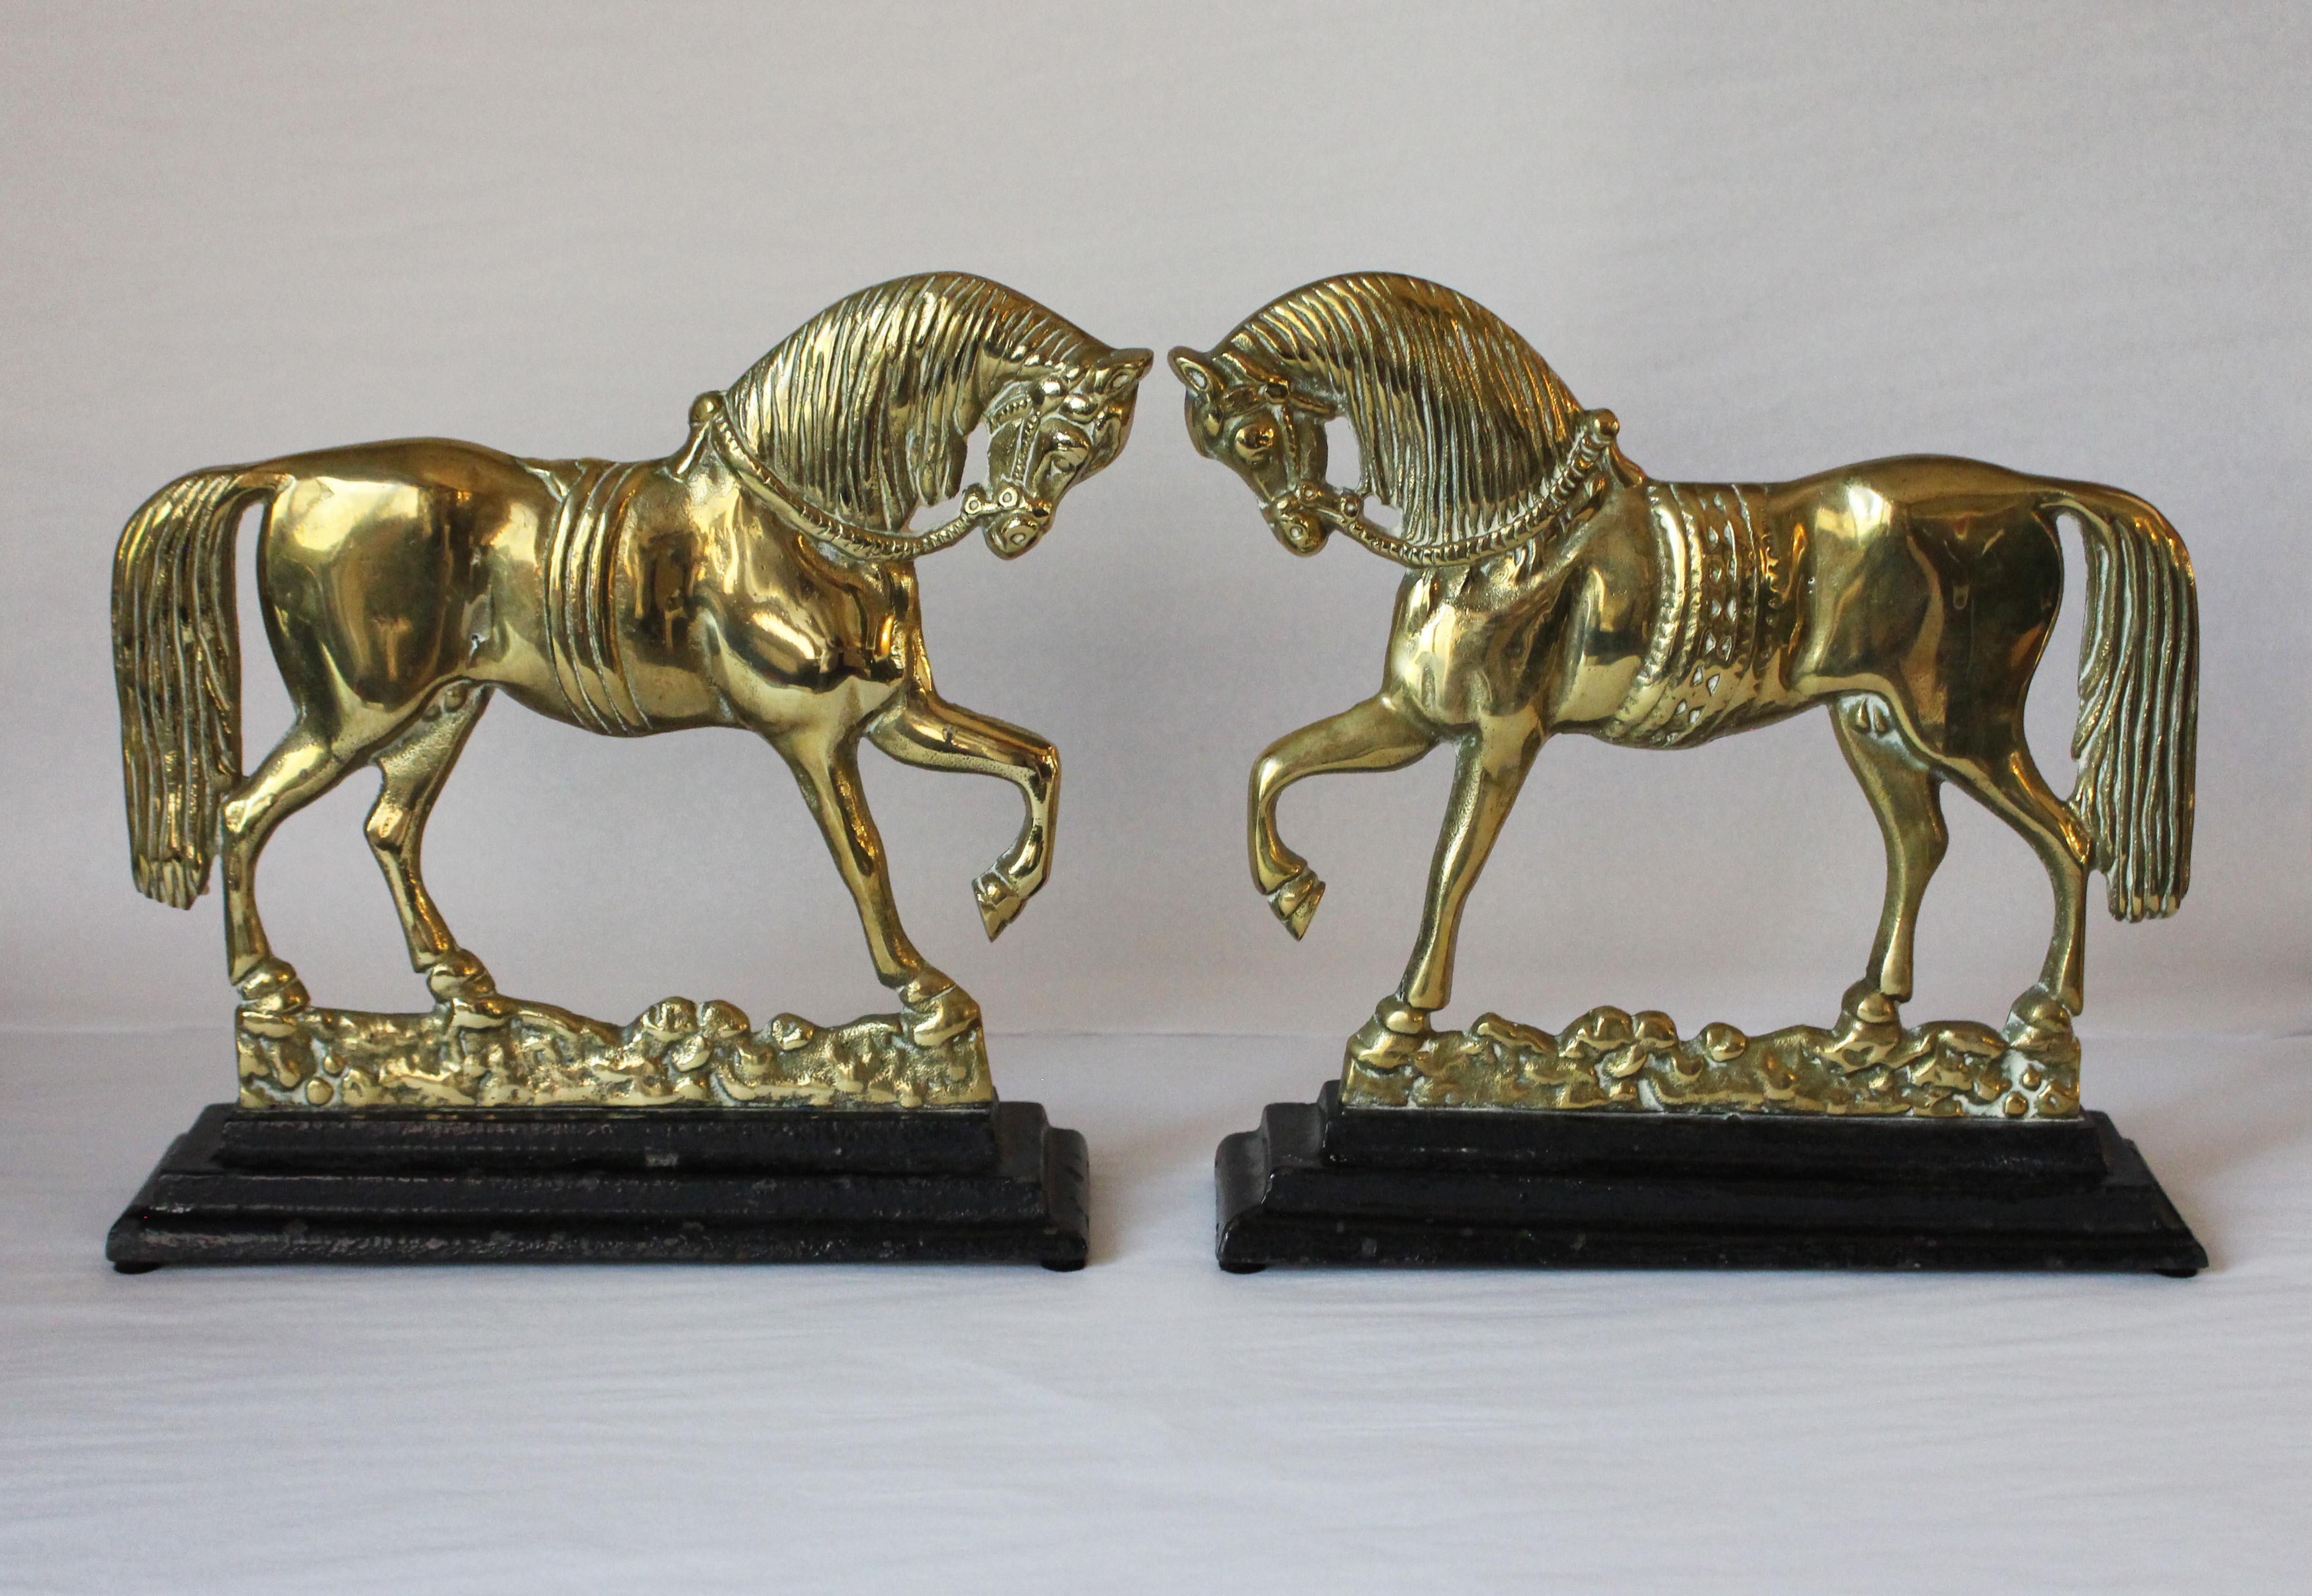 Late 19th-early 20th century pair of trotting horse chimney ornaments, brass on iron stepped bases, very well molded, cast and detailed. English. Ideal as bookends, doorstops, or decoration.

We have been a major source for the selective buyer for